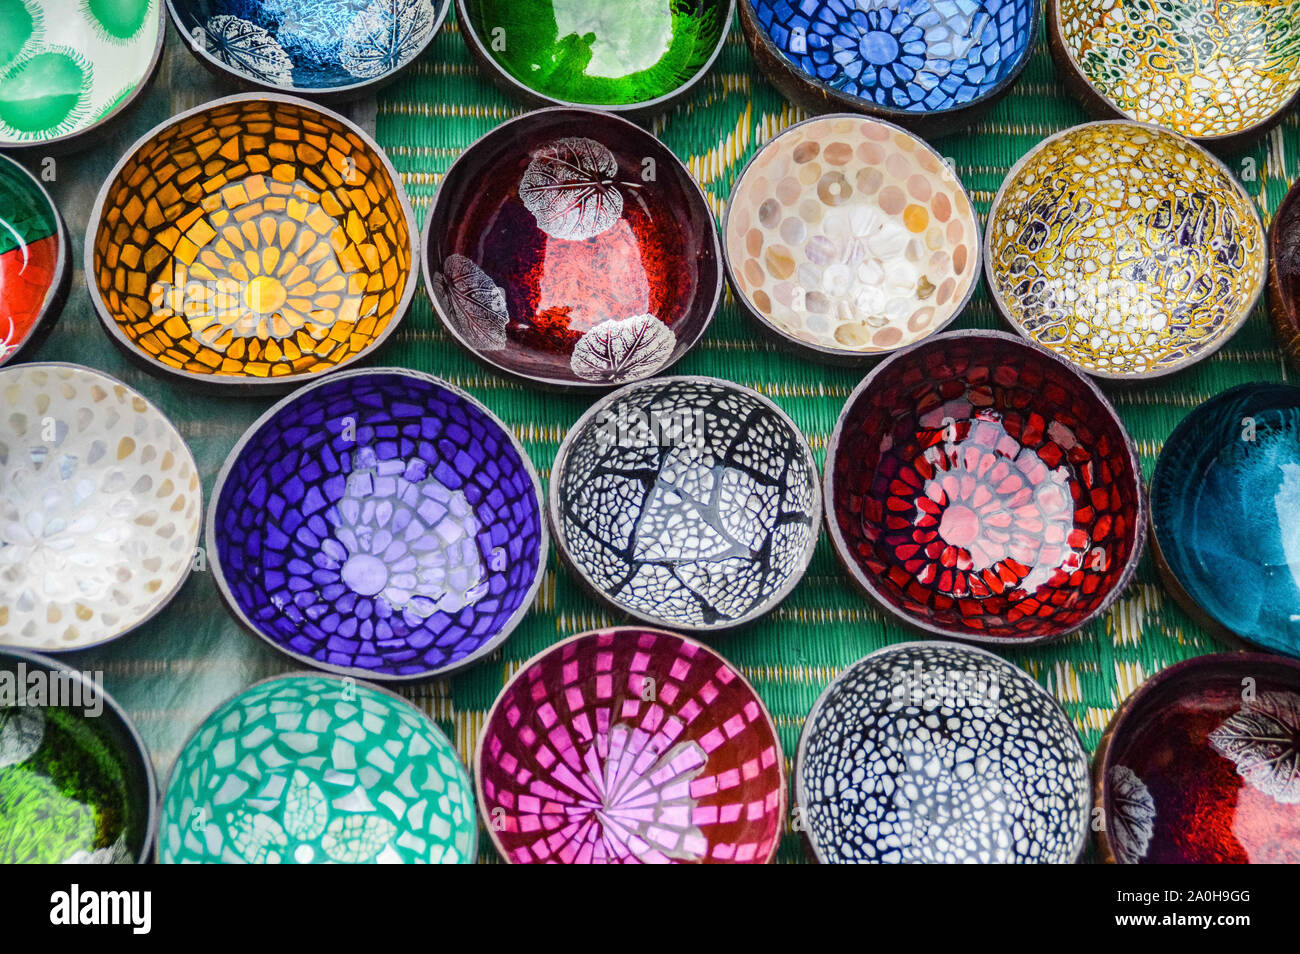 Top view of colorful handmade lacquered bowls made from coconut shells and sold as souvenirs in the local market of Luang Prabang, Laos Stock Photo